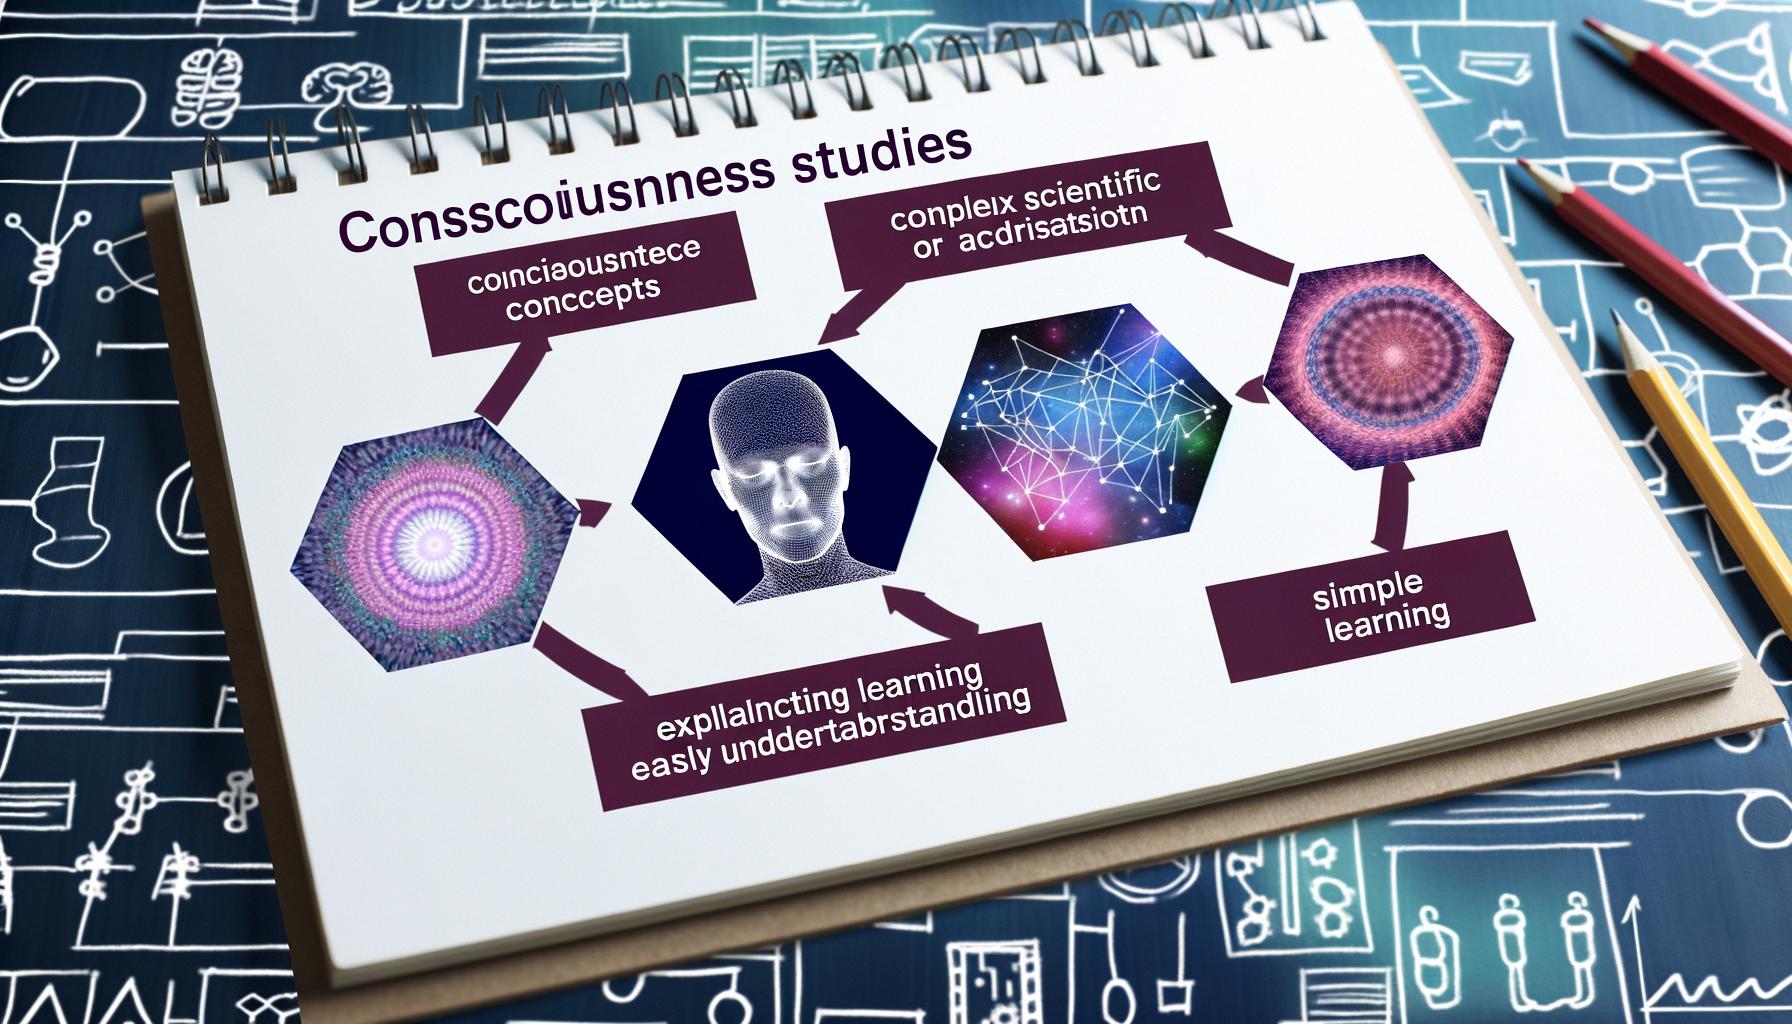 New research provides insights into consciousness beyond physicalist explanations.